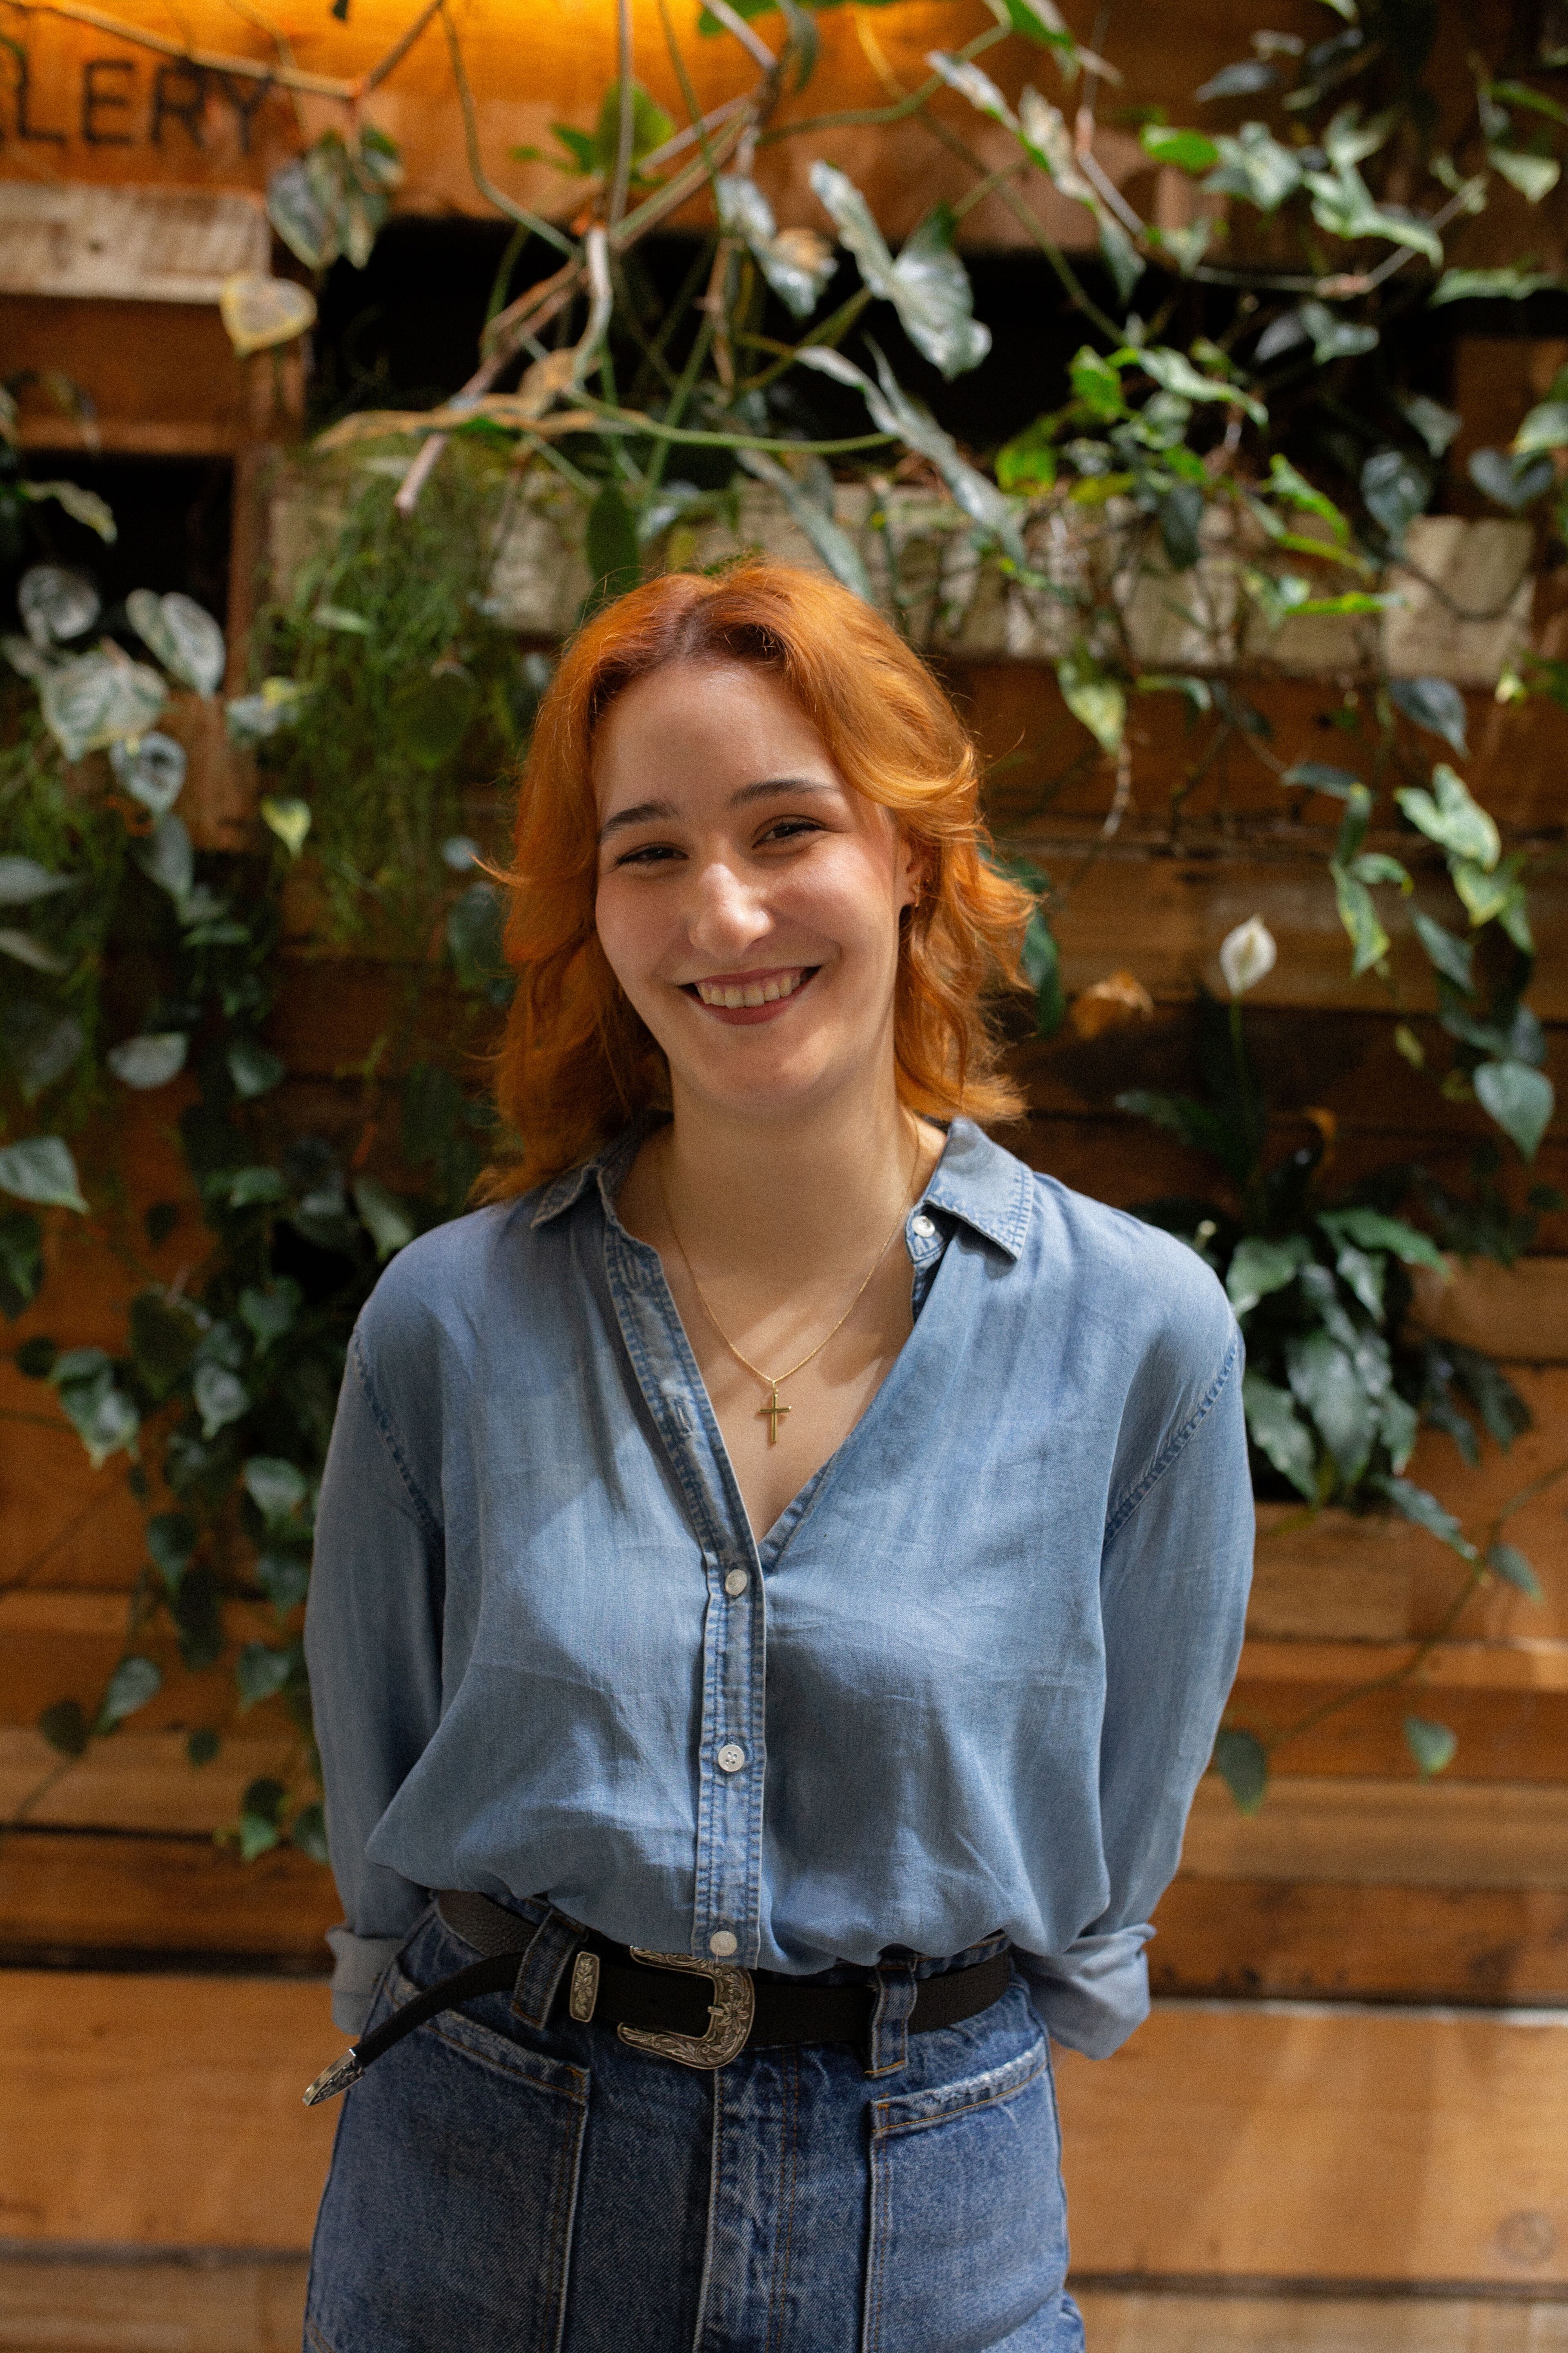 A cheerful young woman with shoulder-length red hair, wearing a blue denim shirt and high-waisted jeans, stands in front of a leafy backdrop.